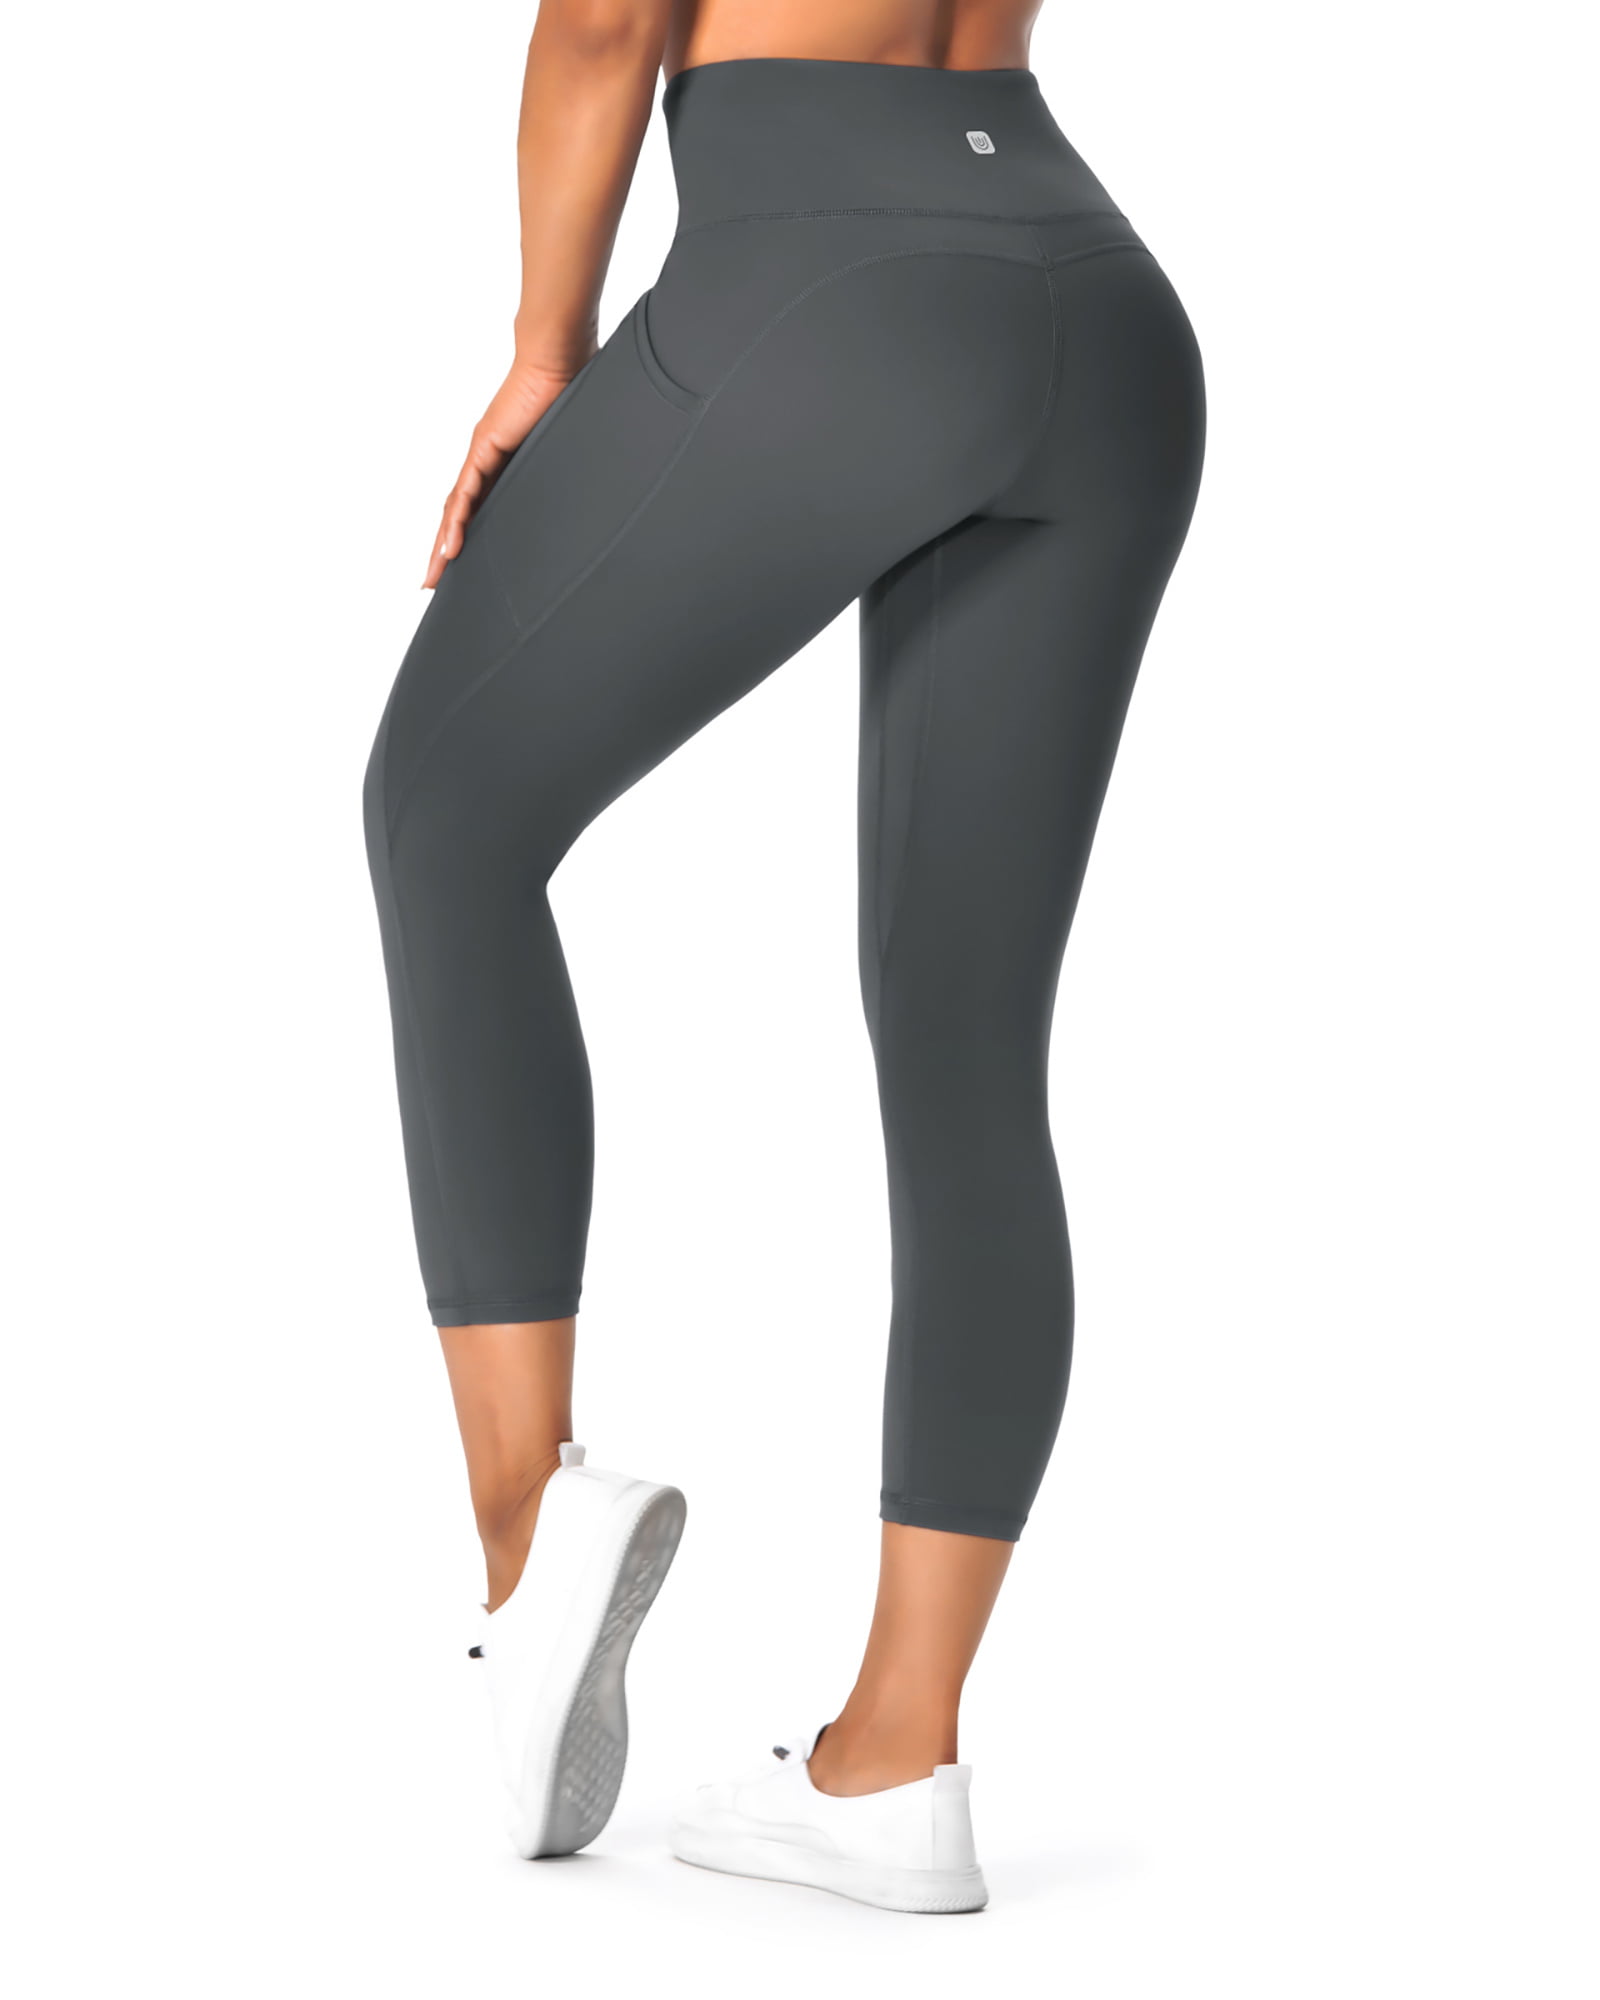 UUE 21Inseam Workout Leggings for Women,Yoga Capris with Pockets